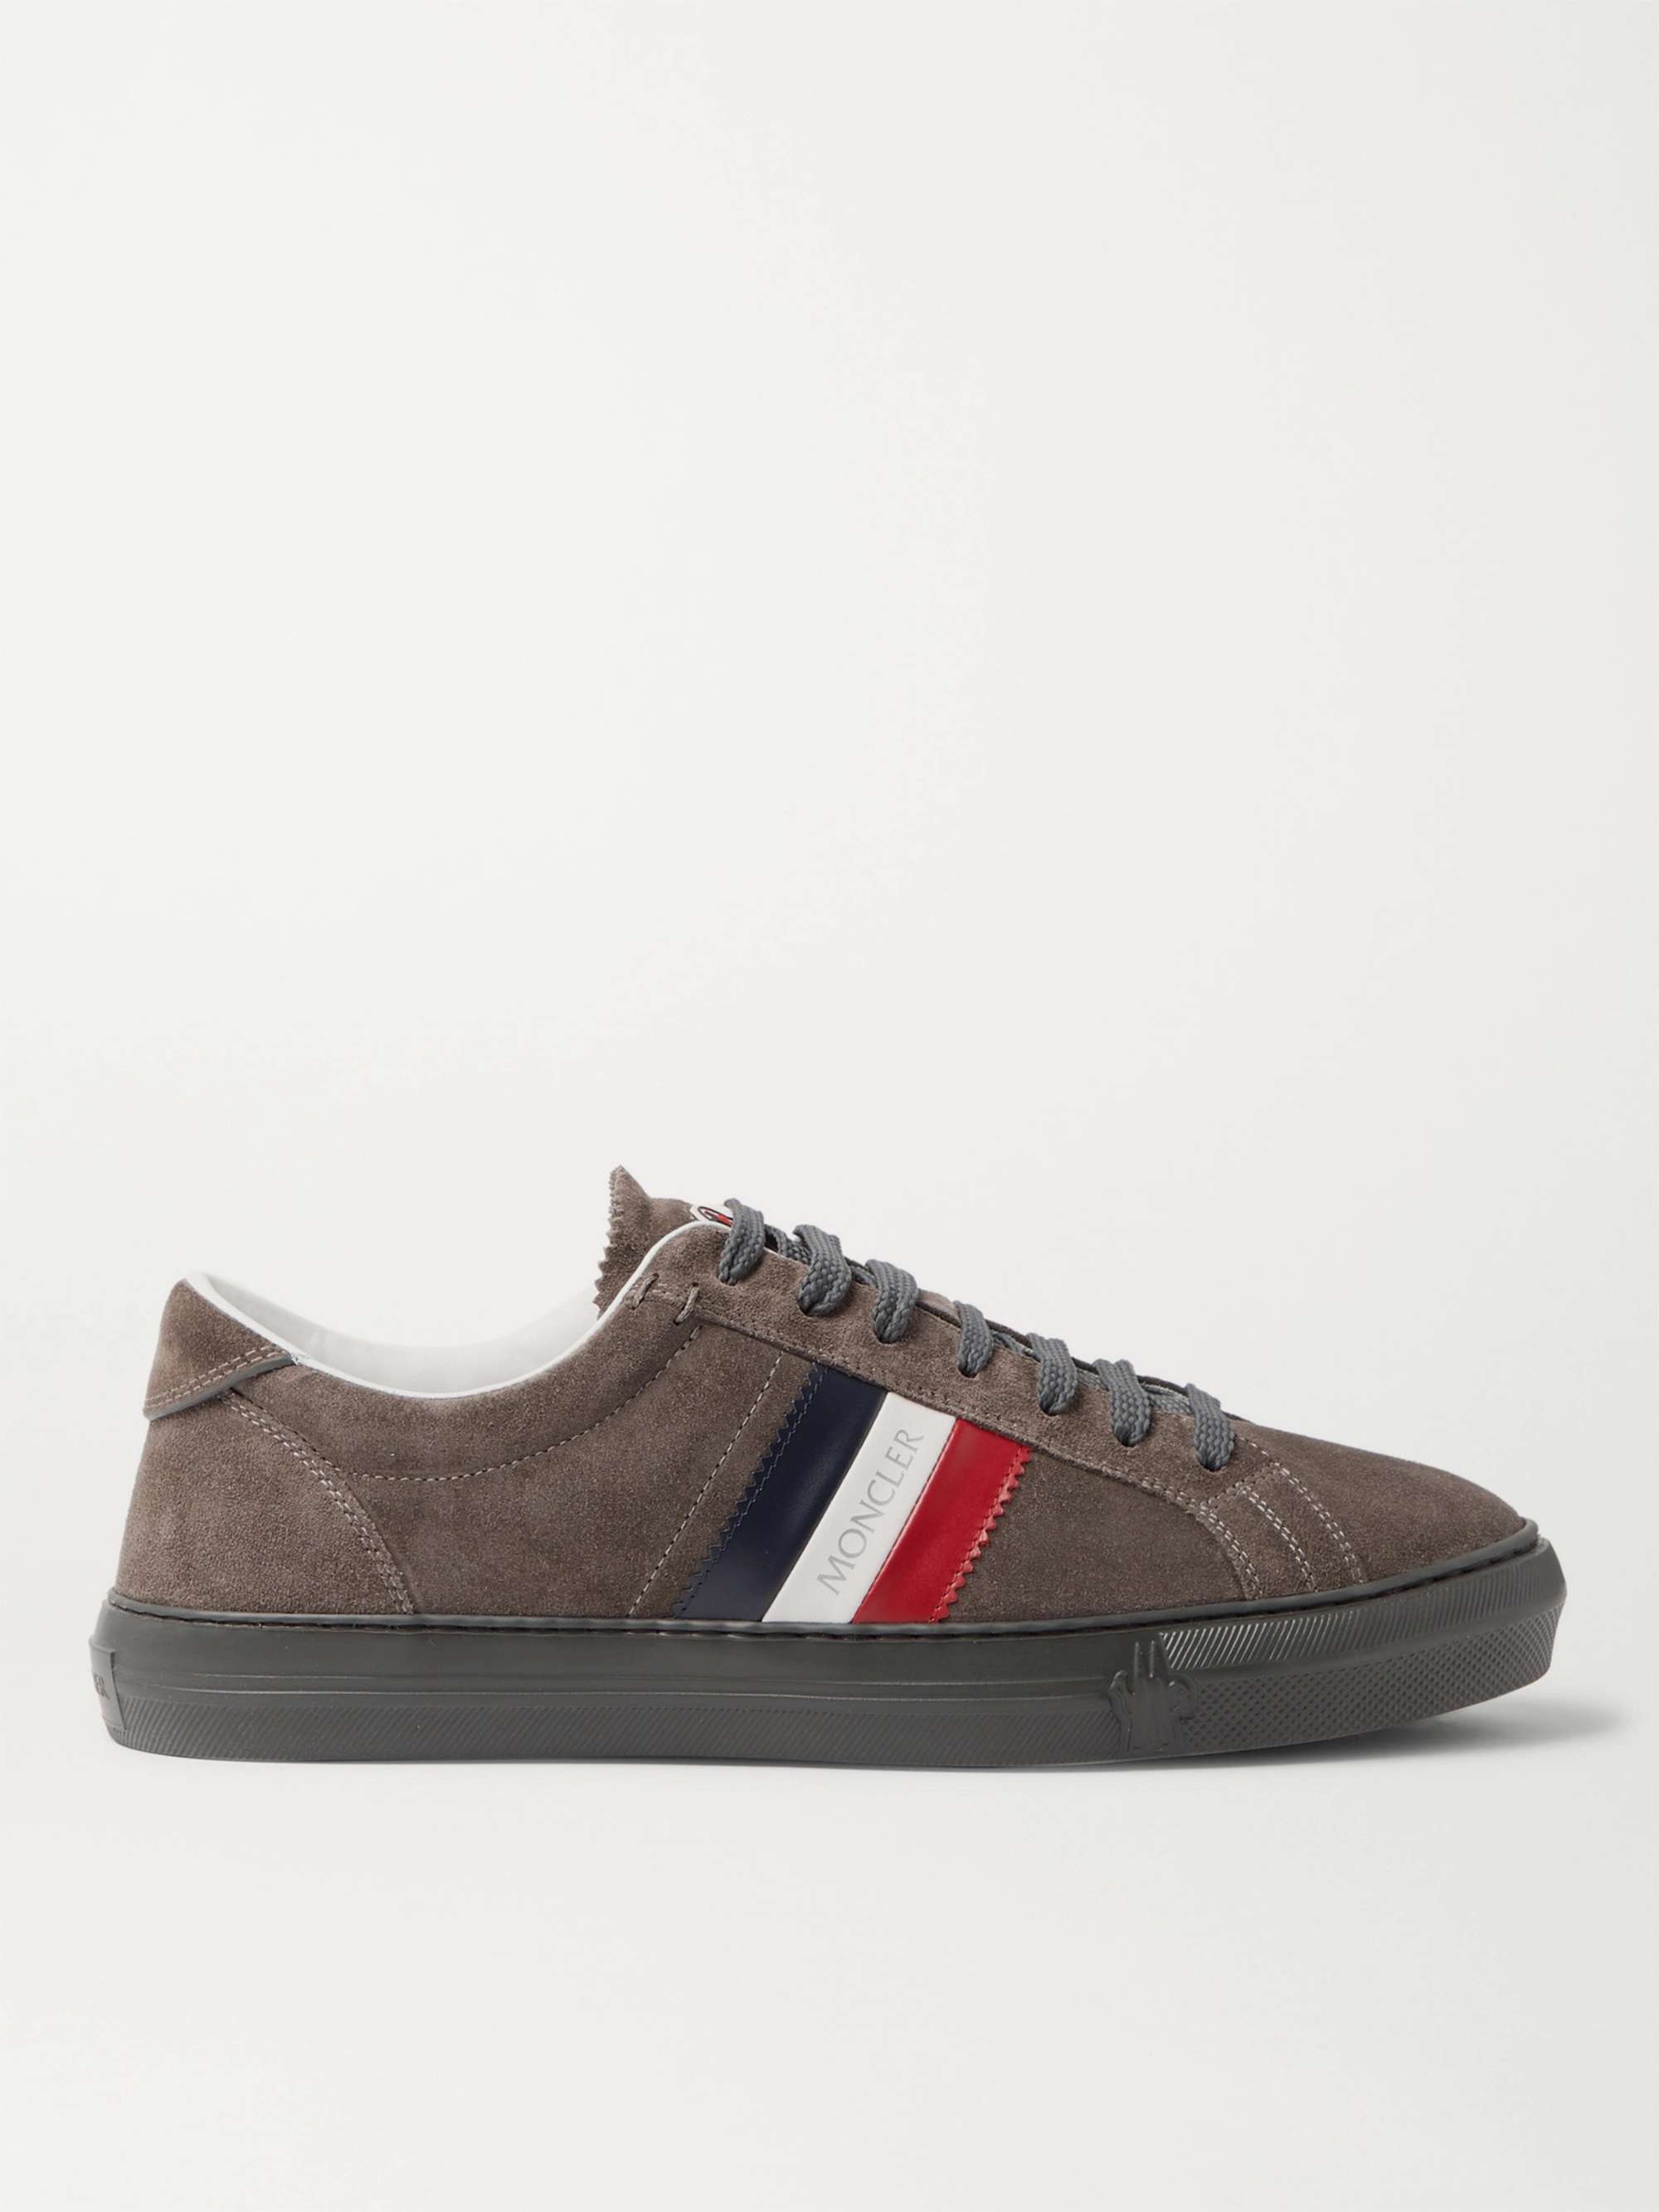 MONCLER New Monaco Striped Leather Sneakers